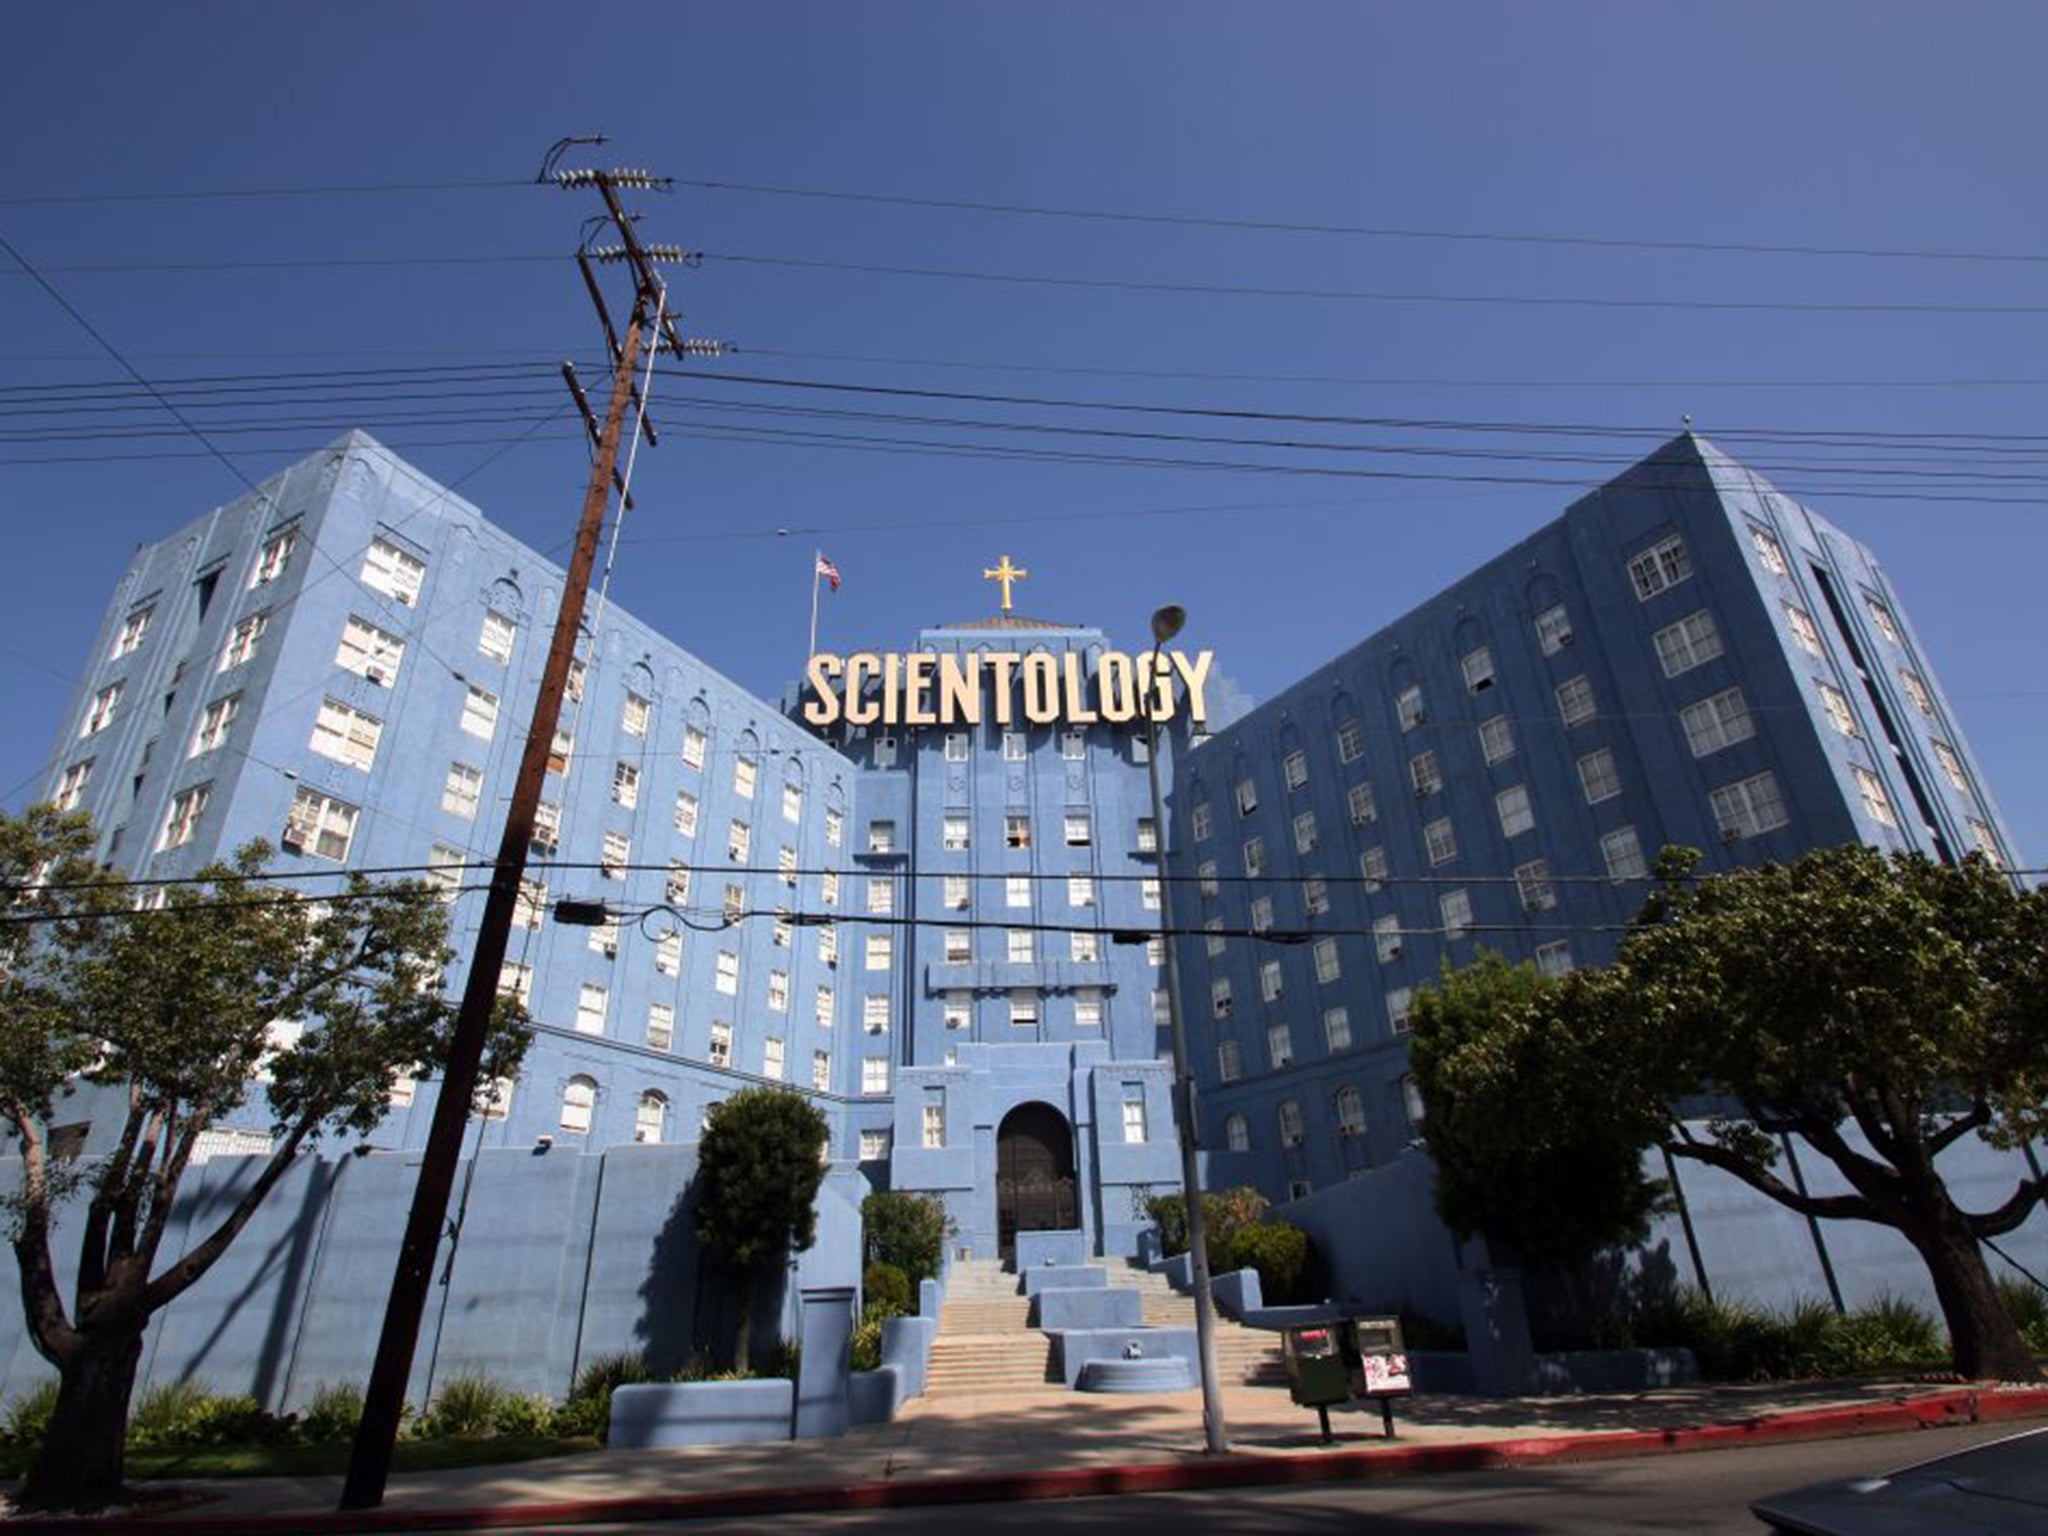 Buying a stairway to Hubbard: the Scientology centre in Los Angeles